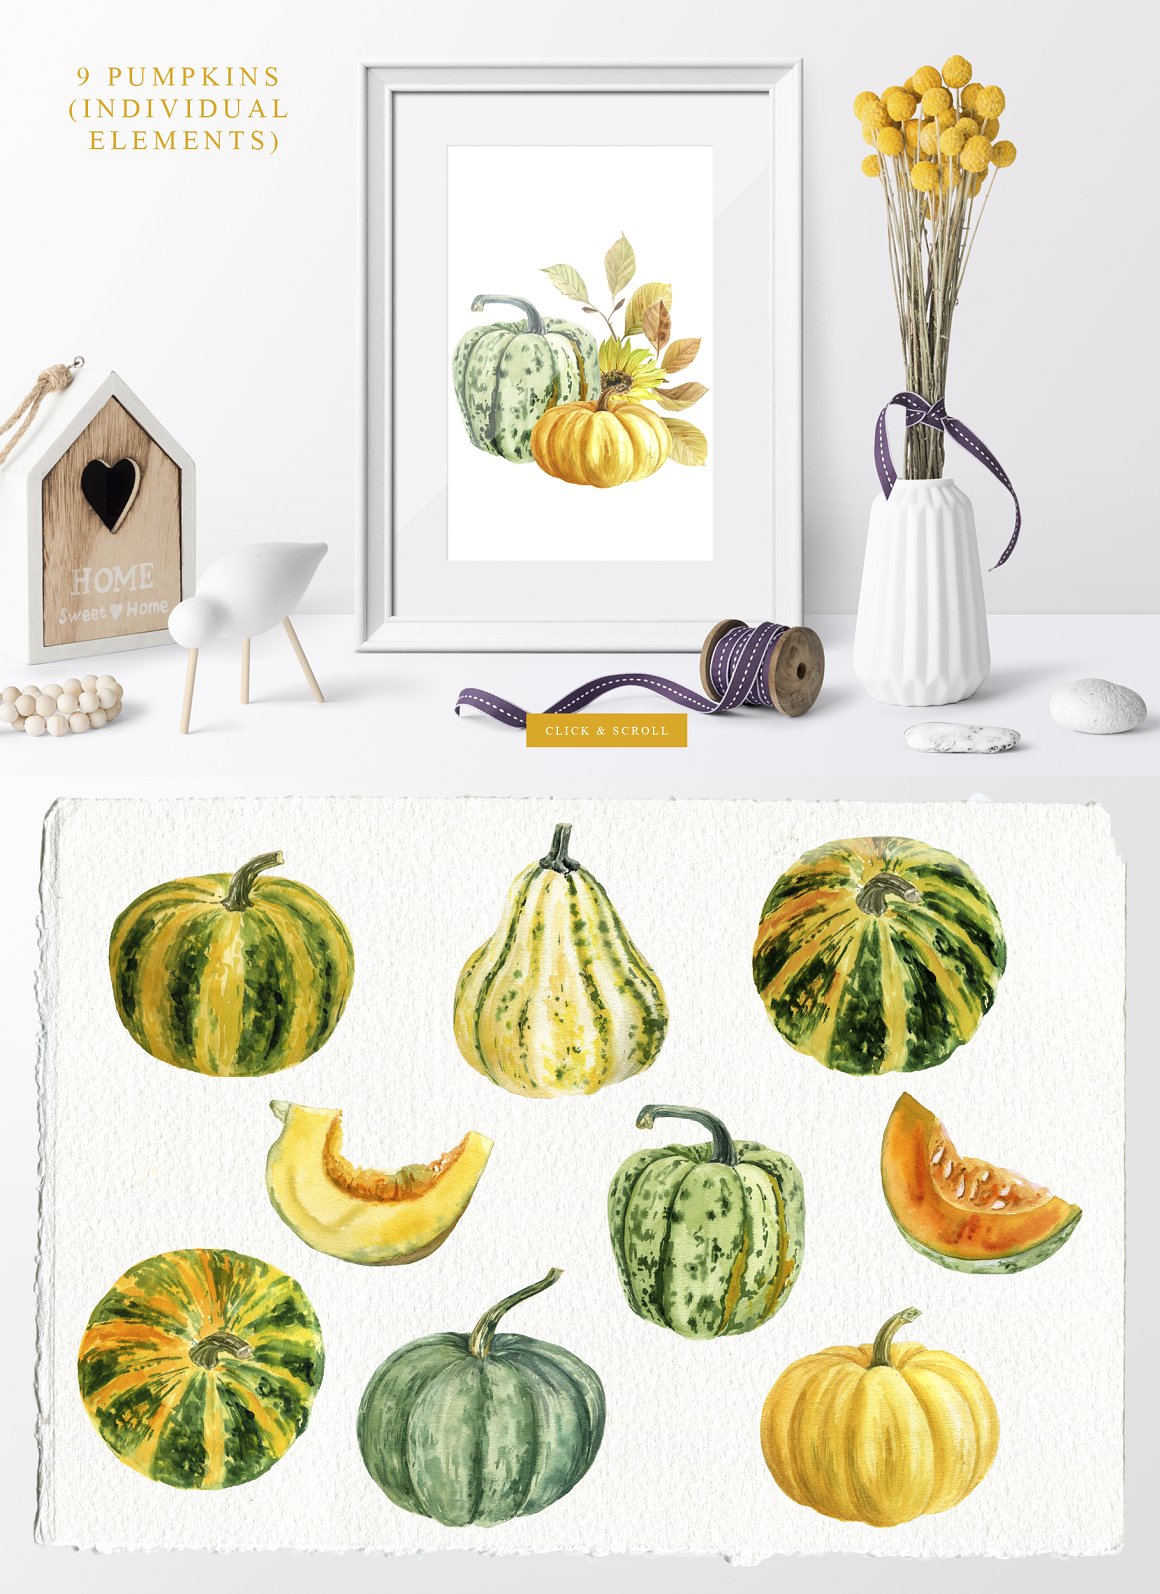 Pumpkin plant and picture.